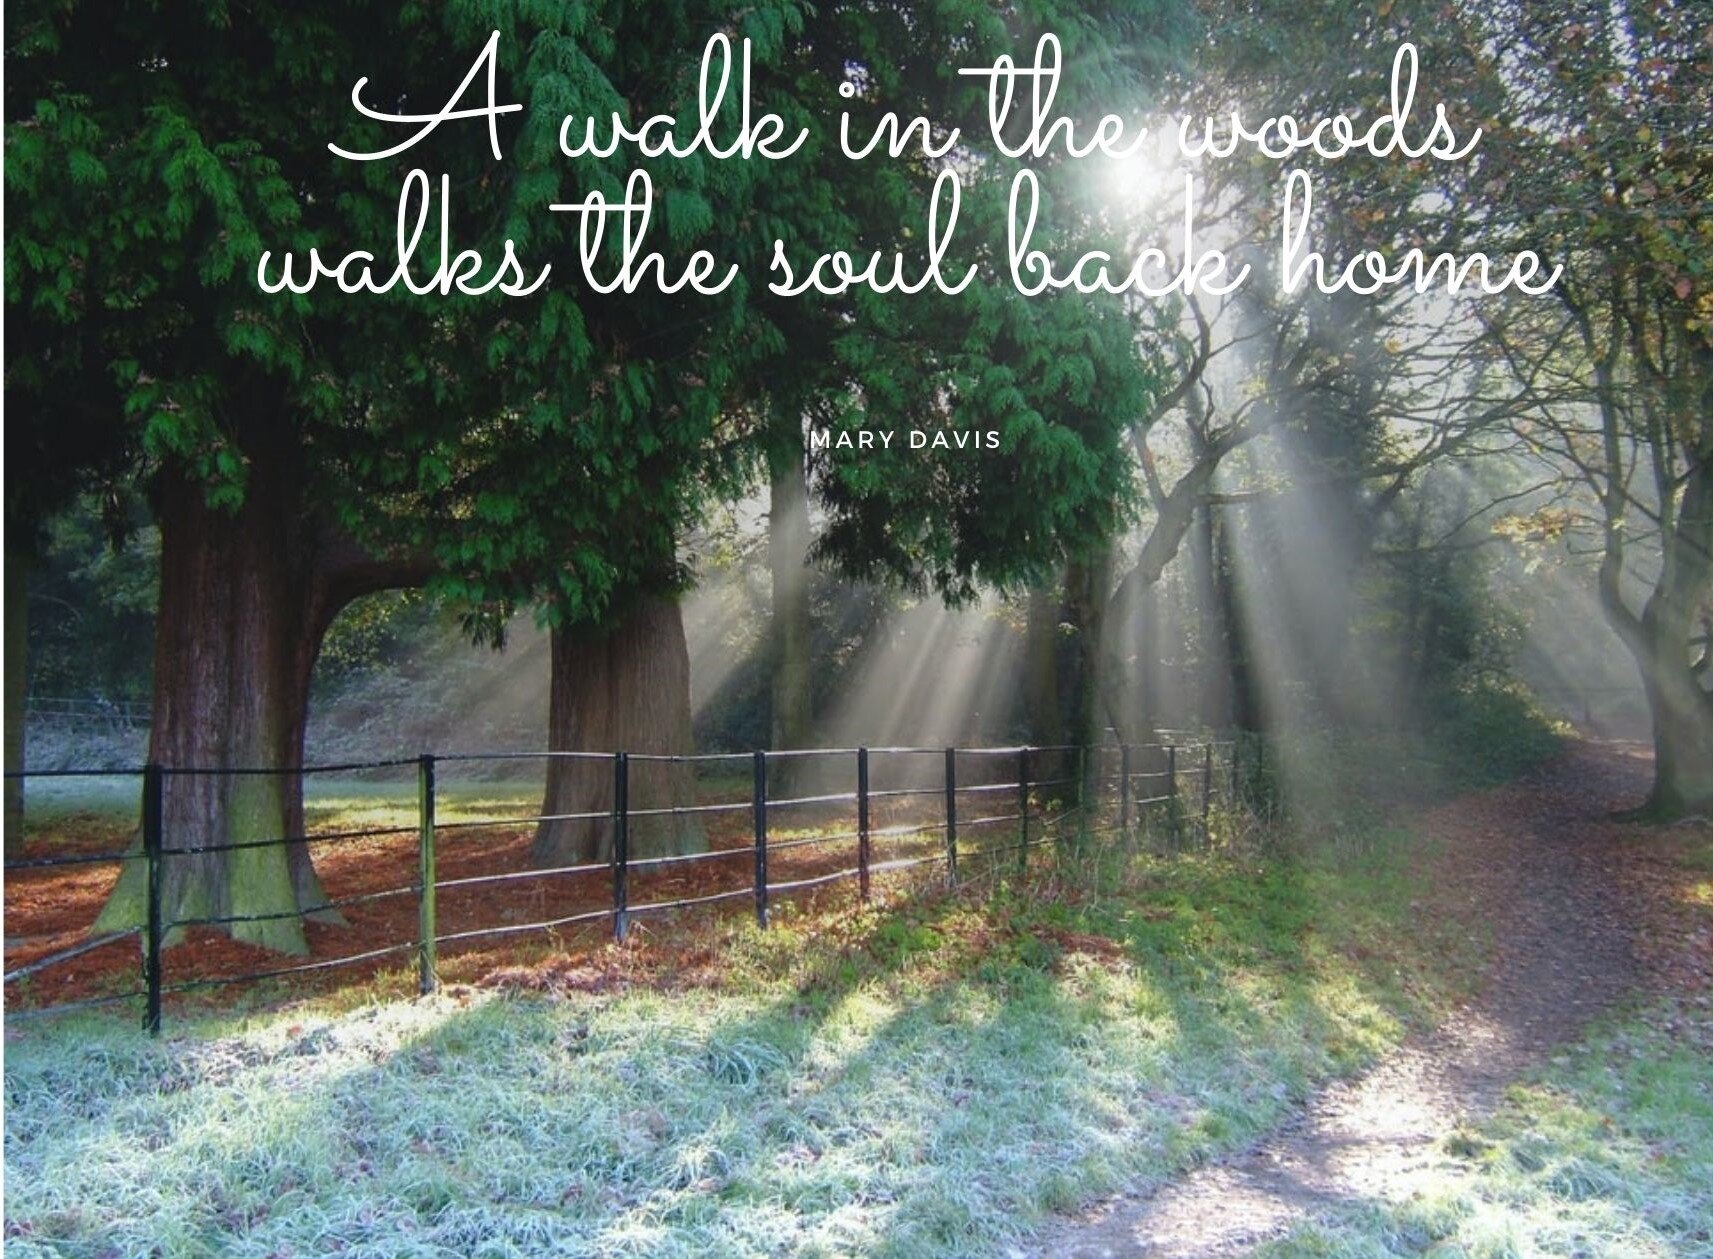 A walk in the woods, walks the soul back home. Quote by Mary Davis